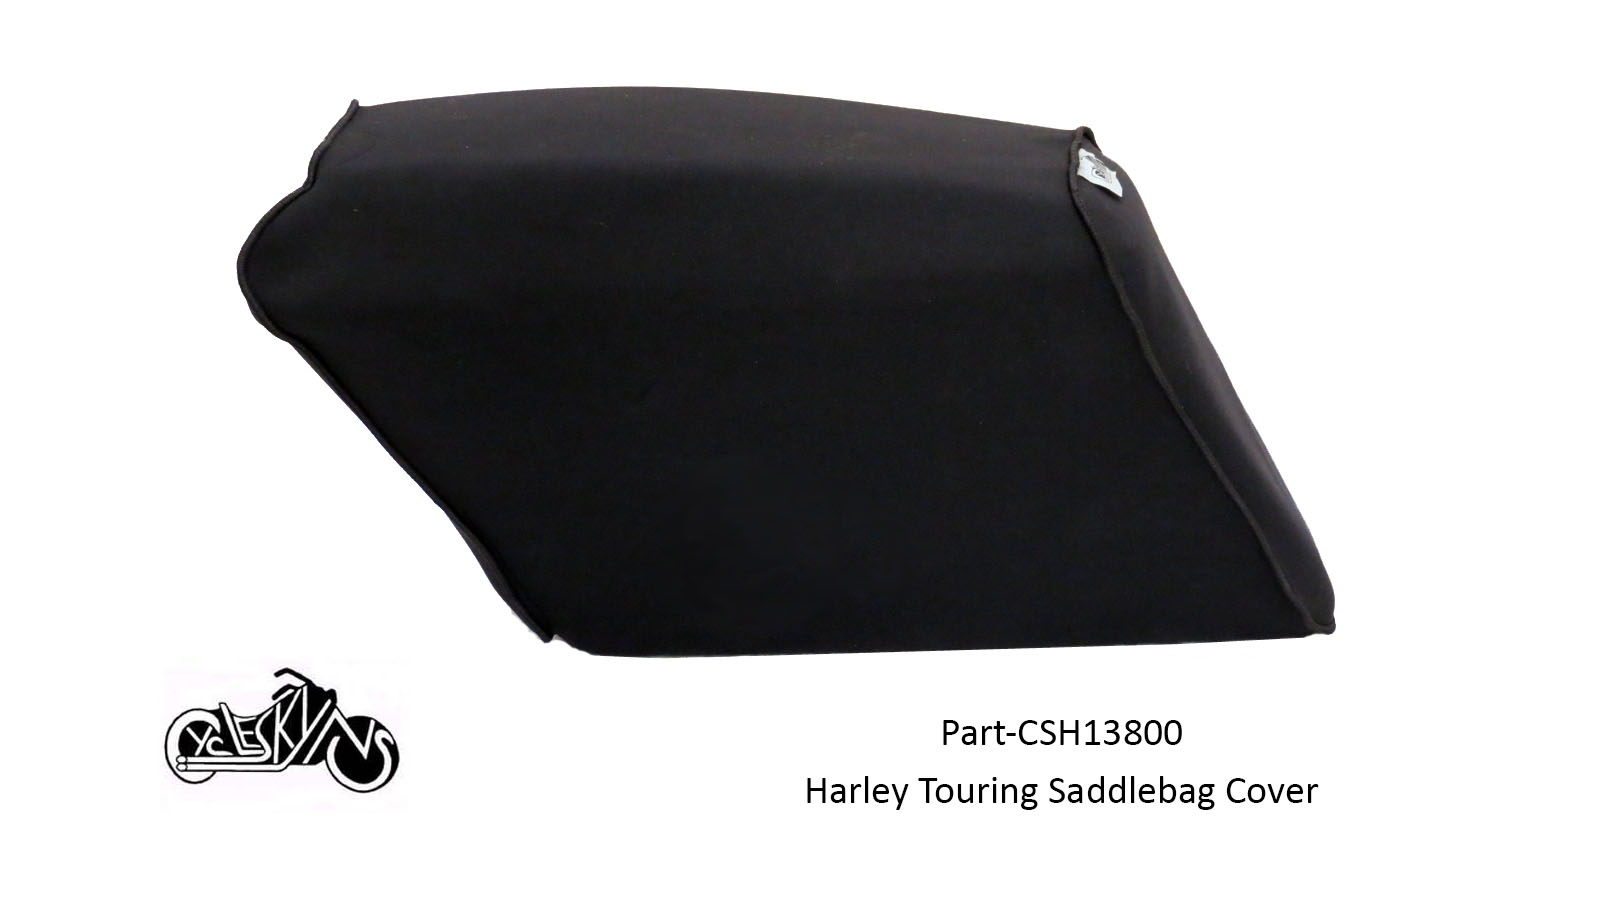 Neoprene Protective mechanic's Cover designed to cover the standard hard saddle bags on touring style Harley Davidson motorcycles.